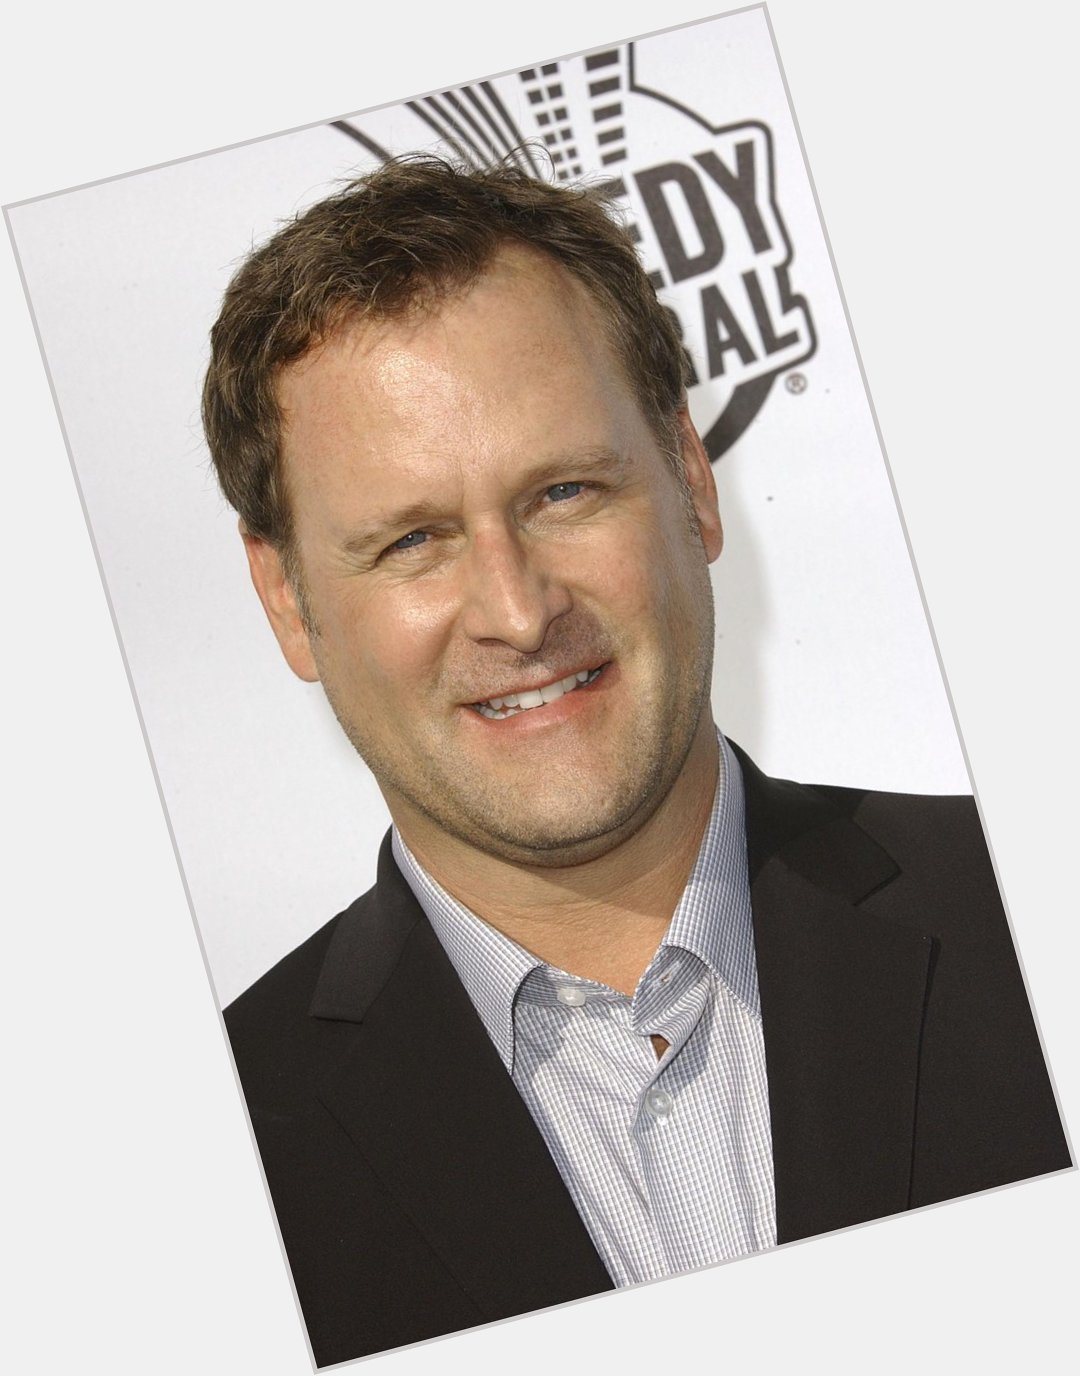 Cut...it...out...Uncle Joey is 56 today. We can\t wait for Fuller House. Happy bday Dave Coulier 